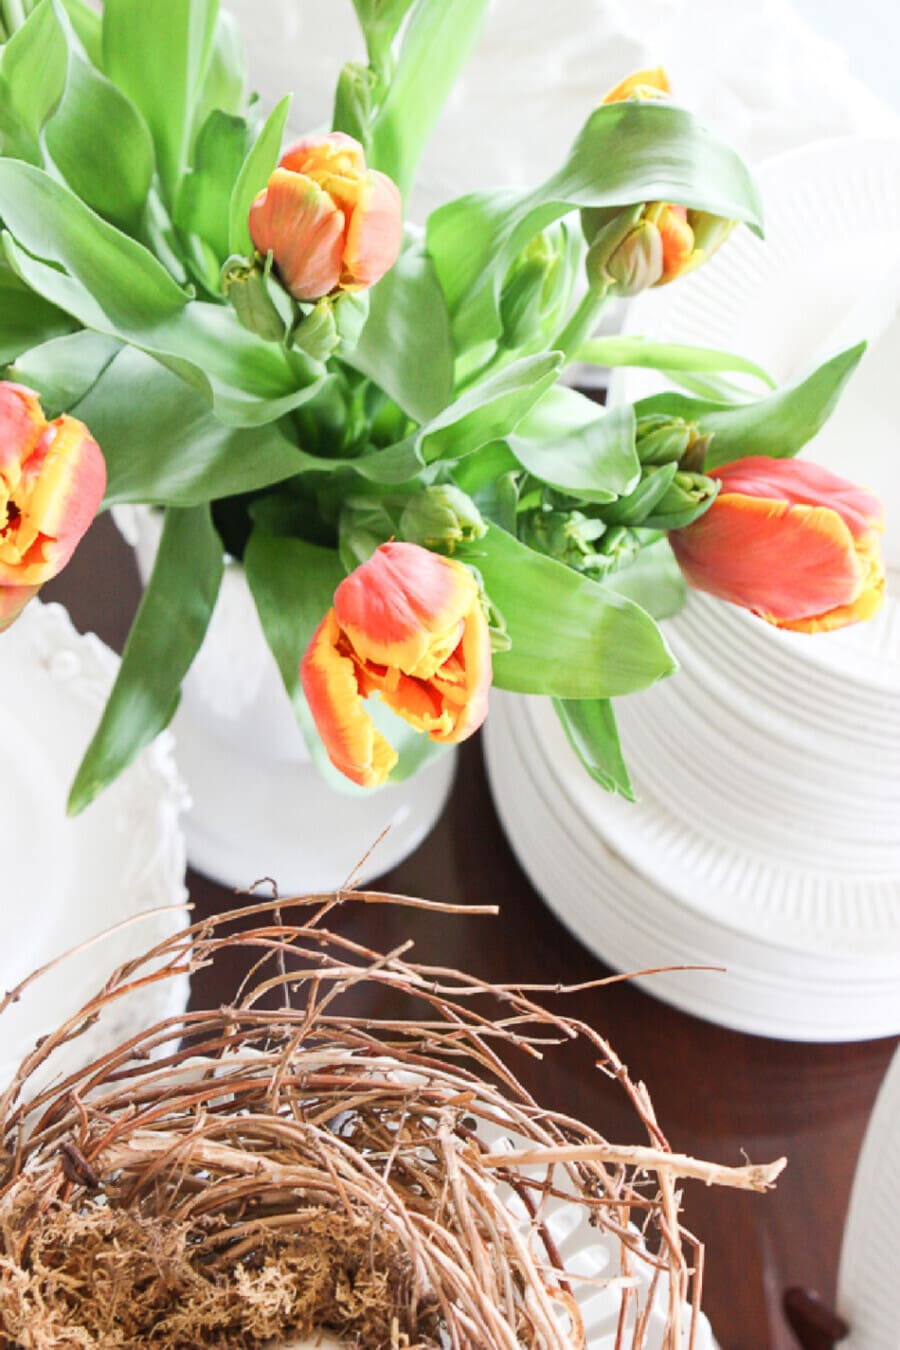 5 Things To Do For Spring + A soup Recipe + Updating decor + More